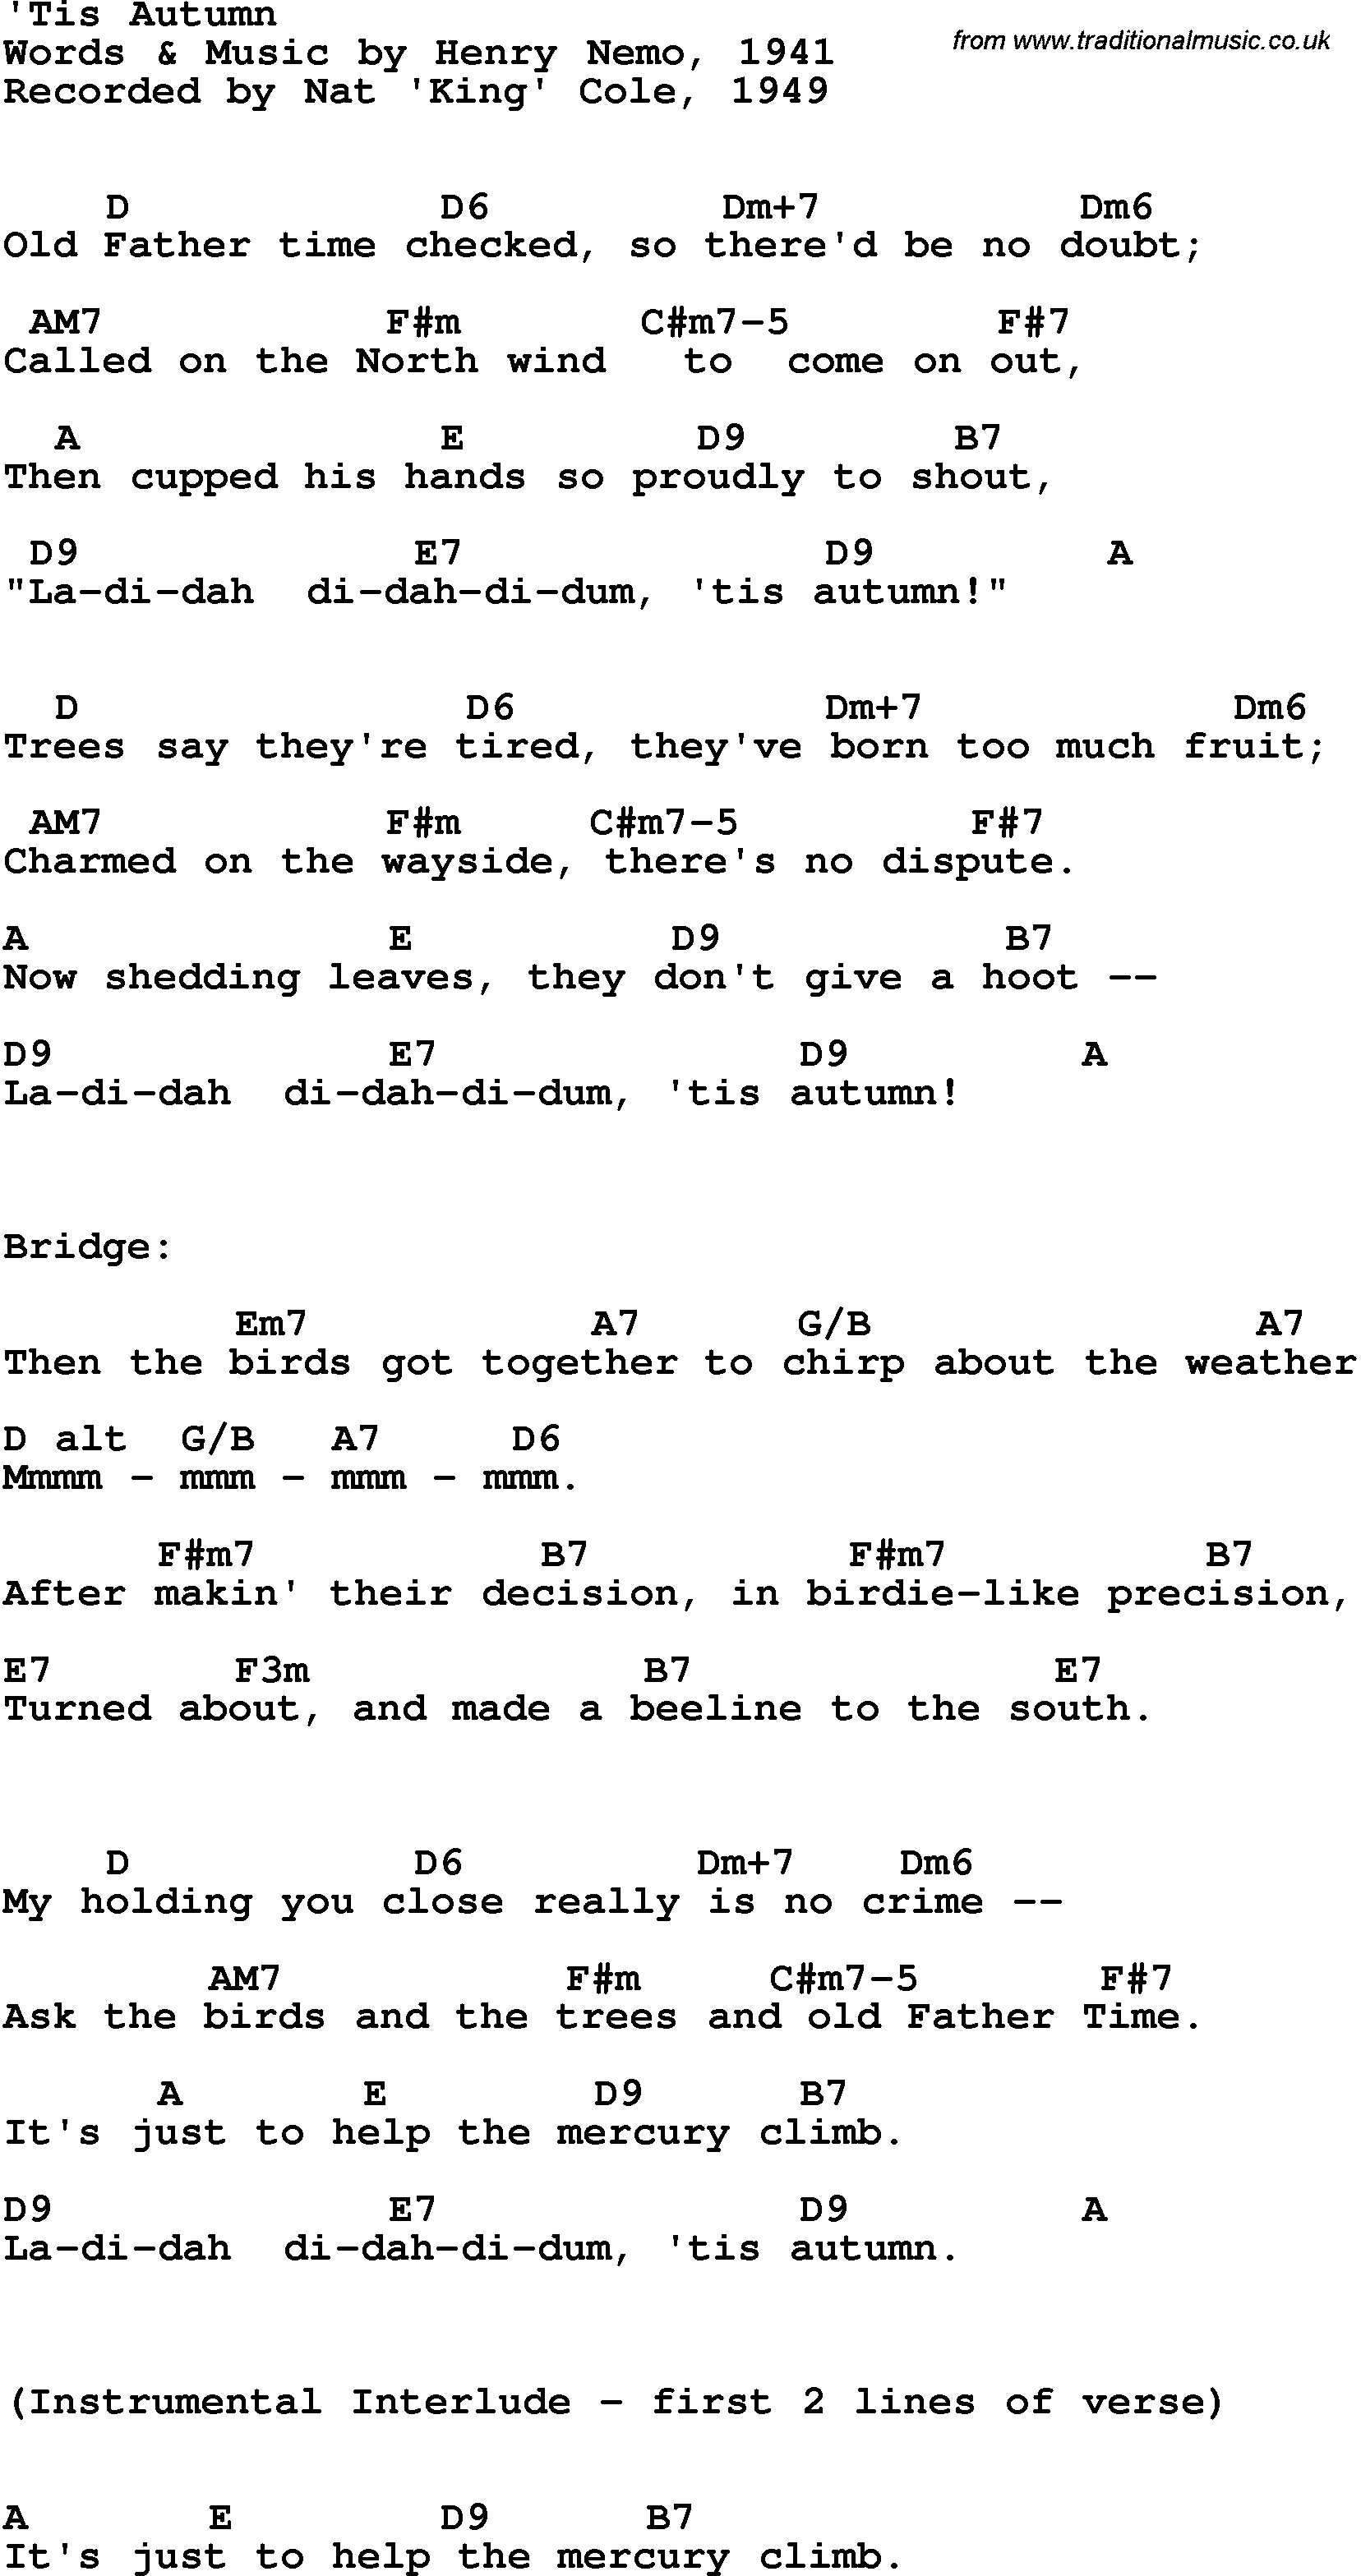 Song Lyrics with guitar chords for 'Tis Autumn - Nat King Cole, 1949